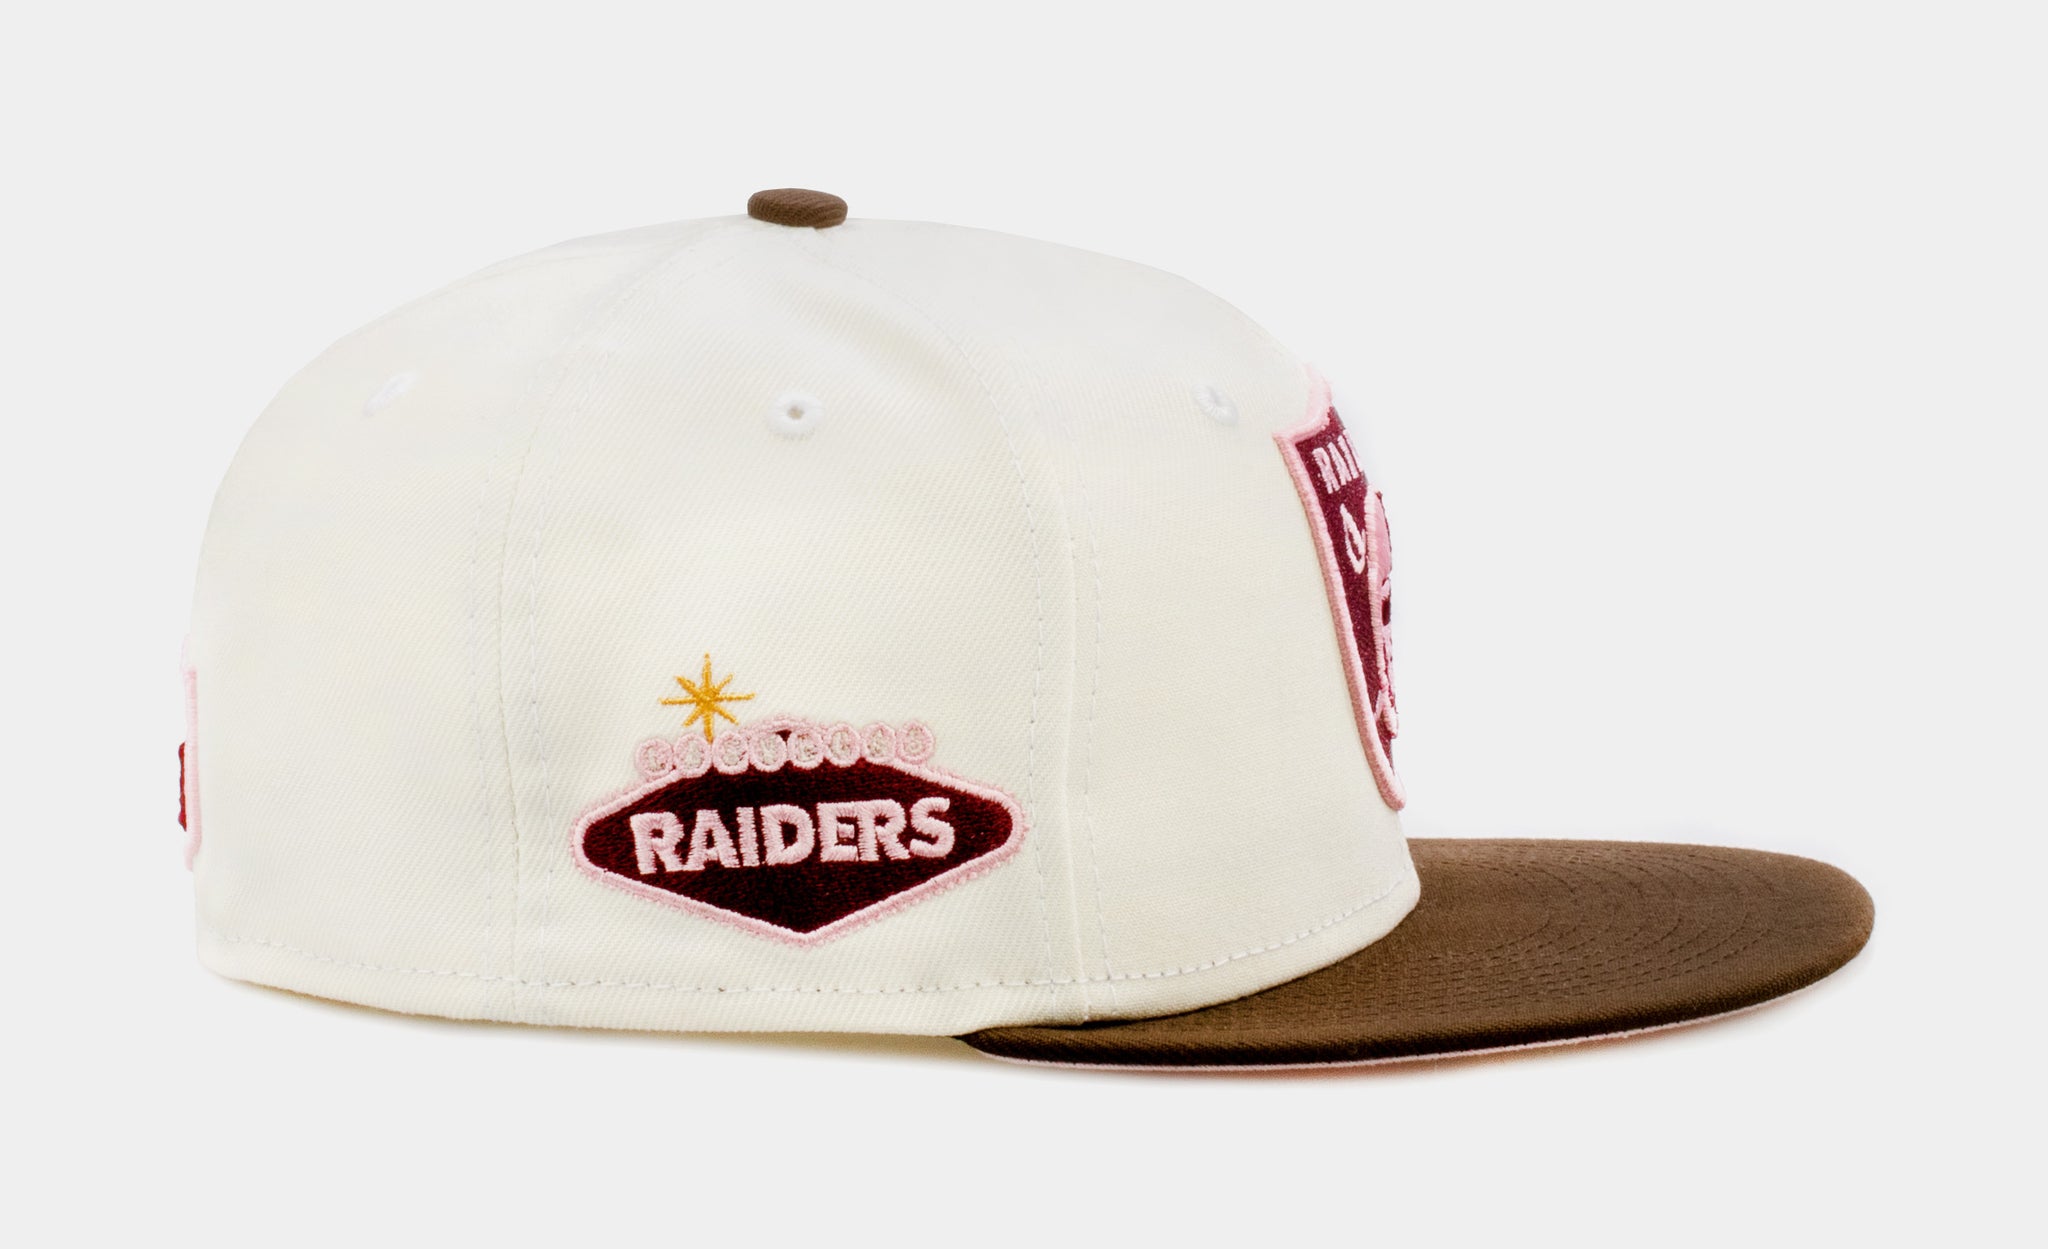 New Era Shoe Palace Collection Las Vegas Raiders 59FIFTY Mens Fitted Hat (White/Black)